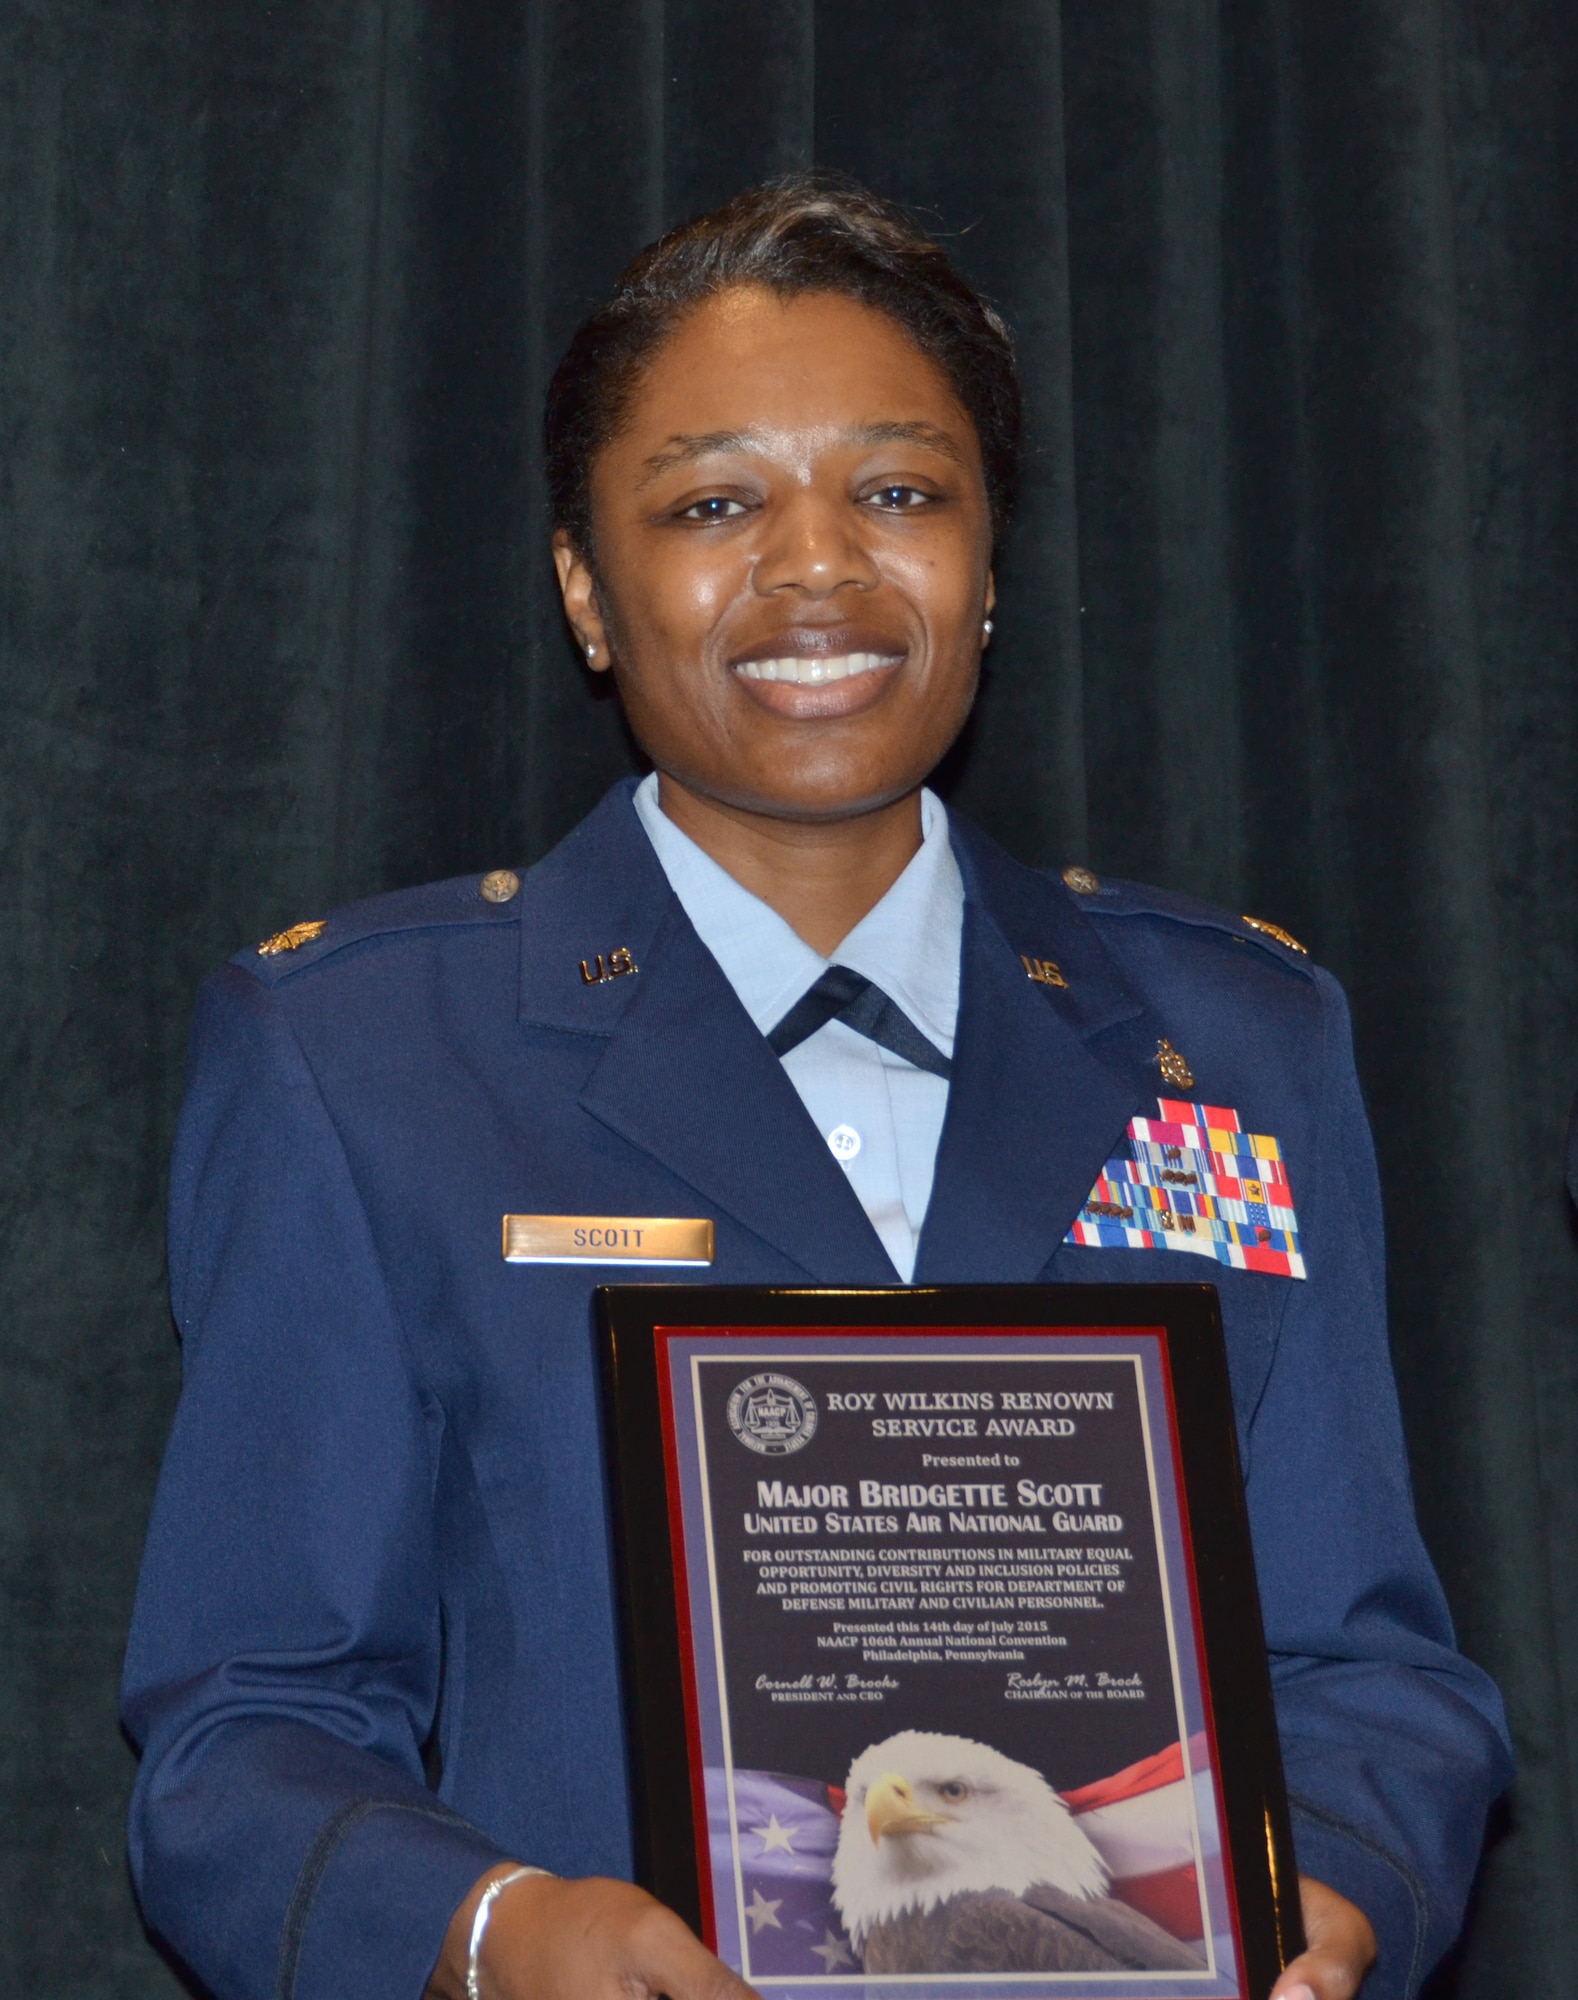 Maj. Bridgette Scott, 188th Medical Group administrative officer, presents her 2015 National Association for the Advancement of Colored People Roy Wilkins Renown Service Award at the Loews Philadelphia Hotel, Philadelphia, July 14, during the 2015 Annual NAACP Armed Services and Veterans Affairs Awards Luncheon. The NAACP recognizes Department of Defense personnel from the military services and defense agencies for outstanding accomplishments in human relations, equal opportunity, civil rights and is named after civil rights advocate and former NAACP executive director Roy Wilkins. (Courtesy photo)